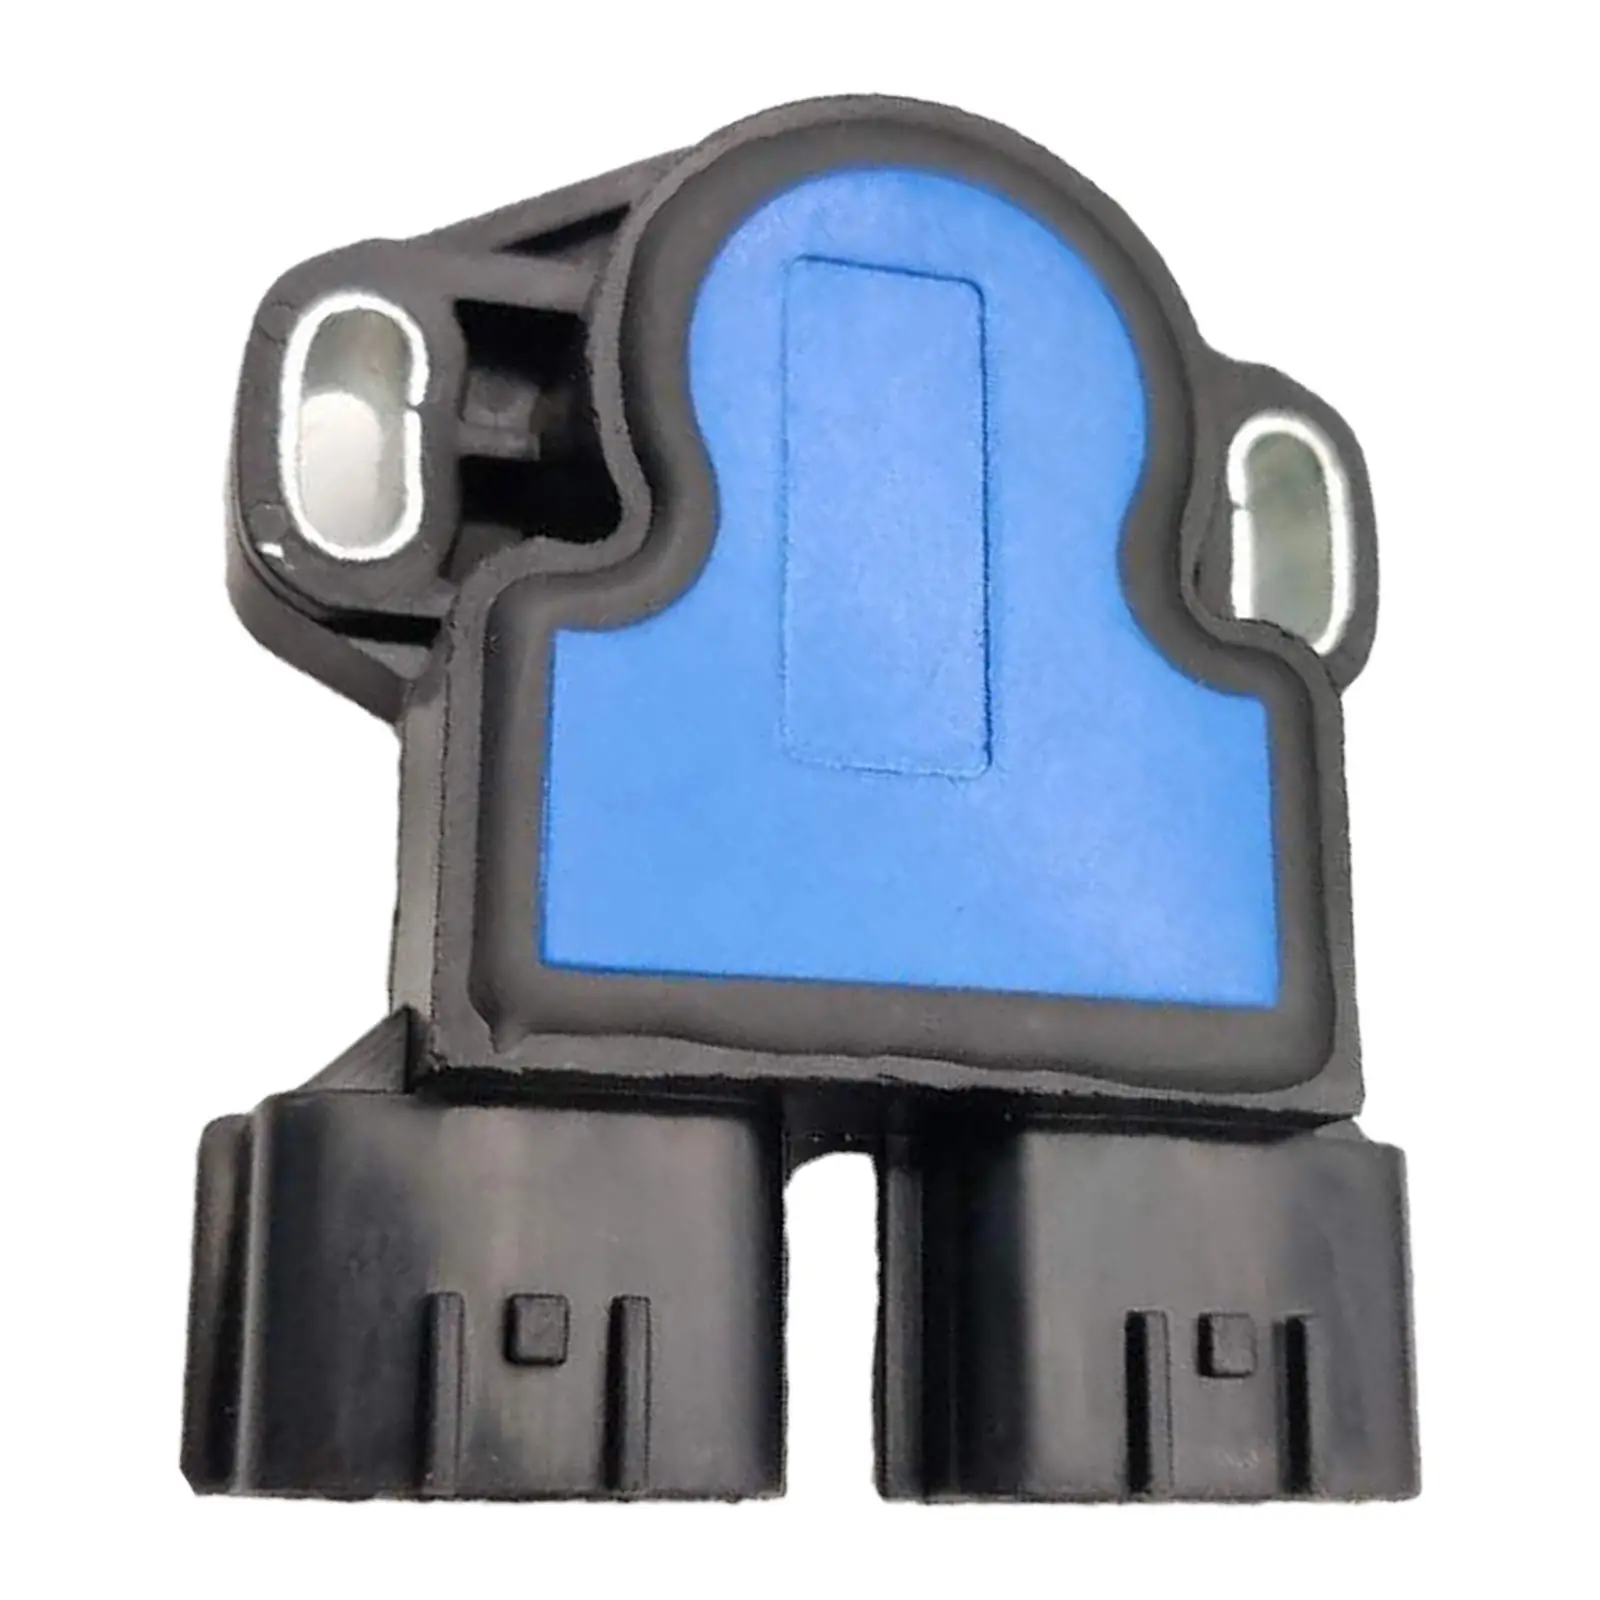 Throttle Position Sensor Fits for Nian Pathfinde SERA486-07 8971631640 SERA486-08 Replacement Part Acceories